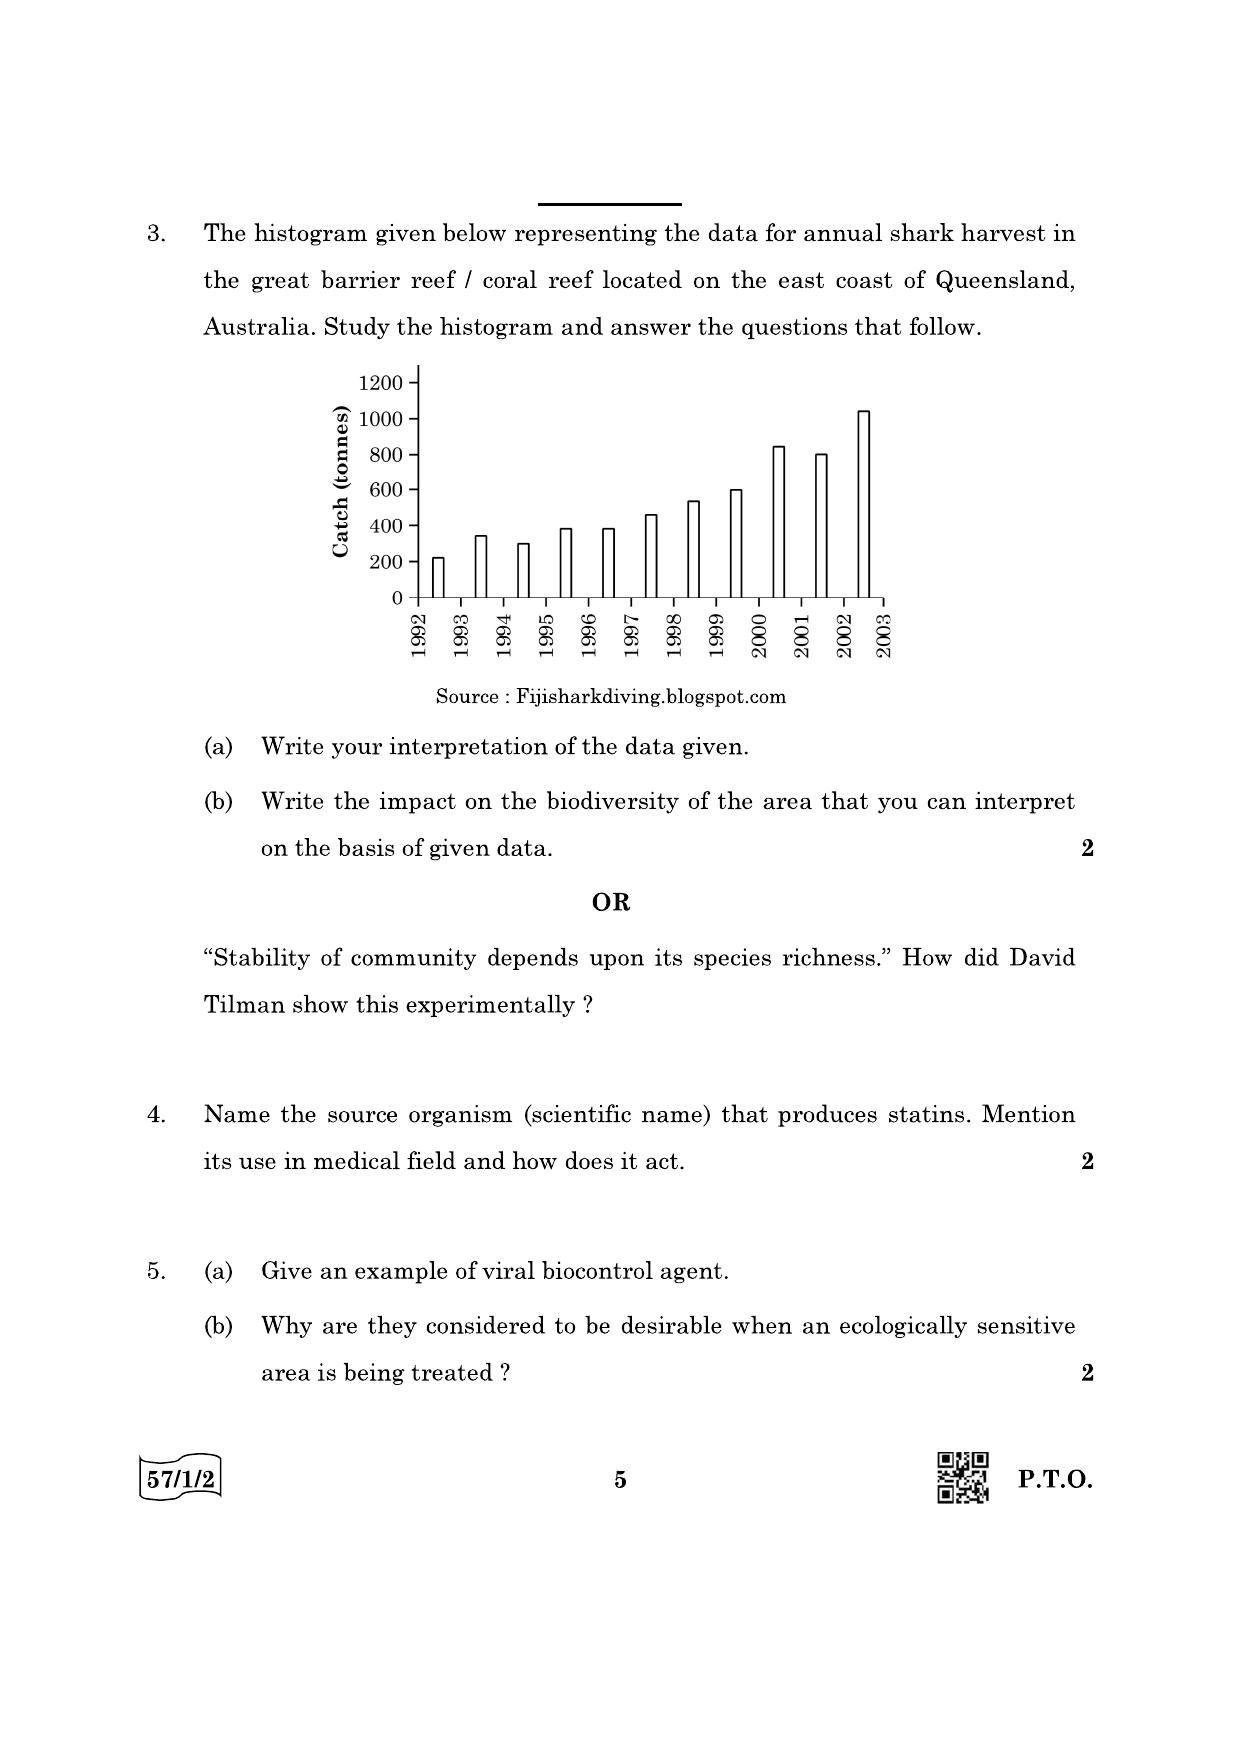 CBSE Class 12 57-1-2 Biology 2022 Question Paper - Page 5